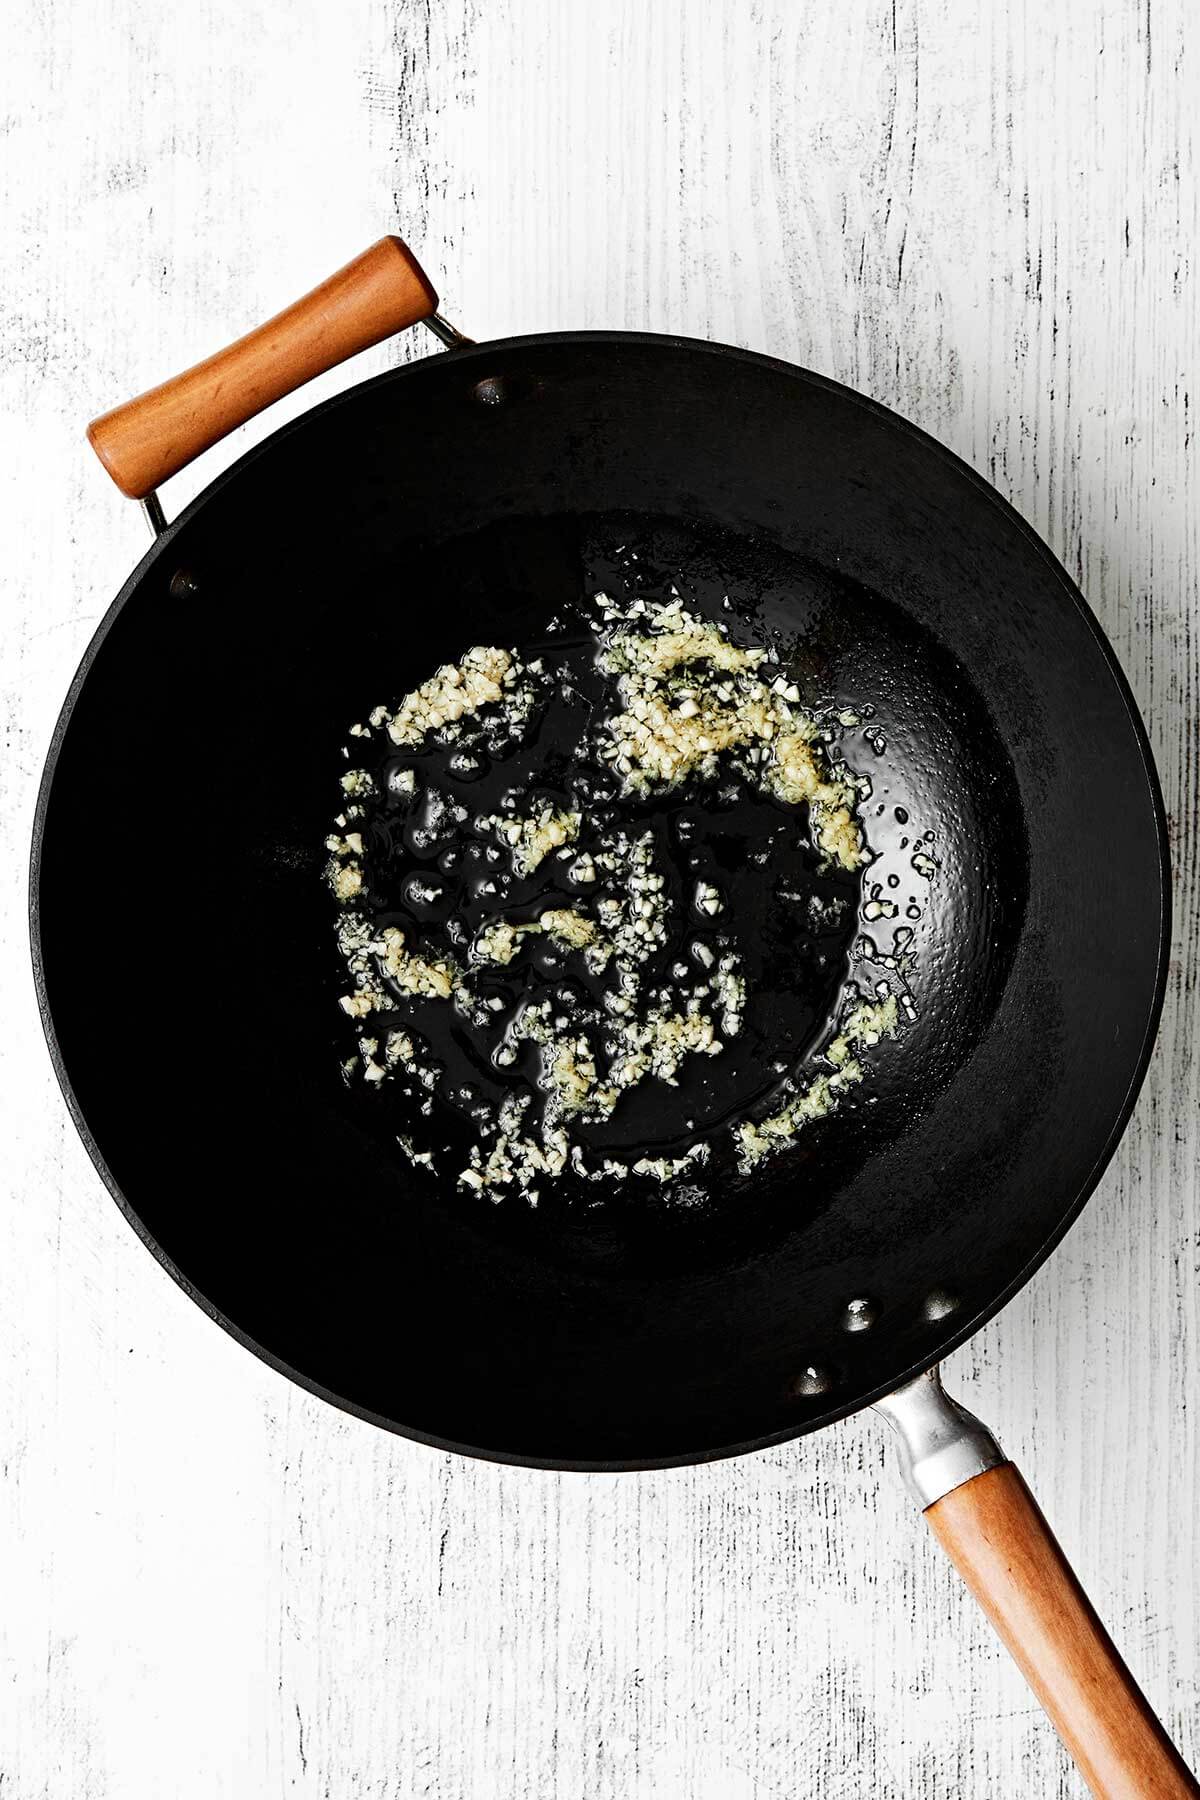 Cooking garlic and ginger in a wok.